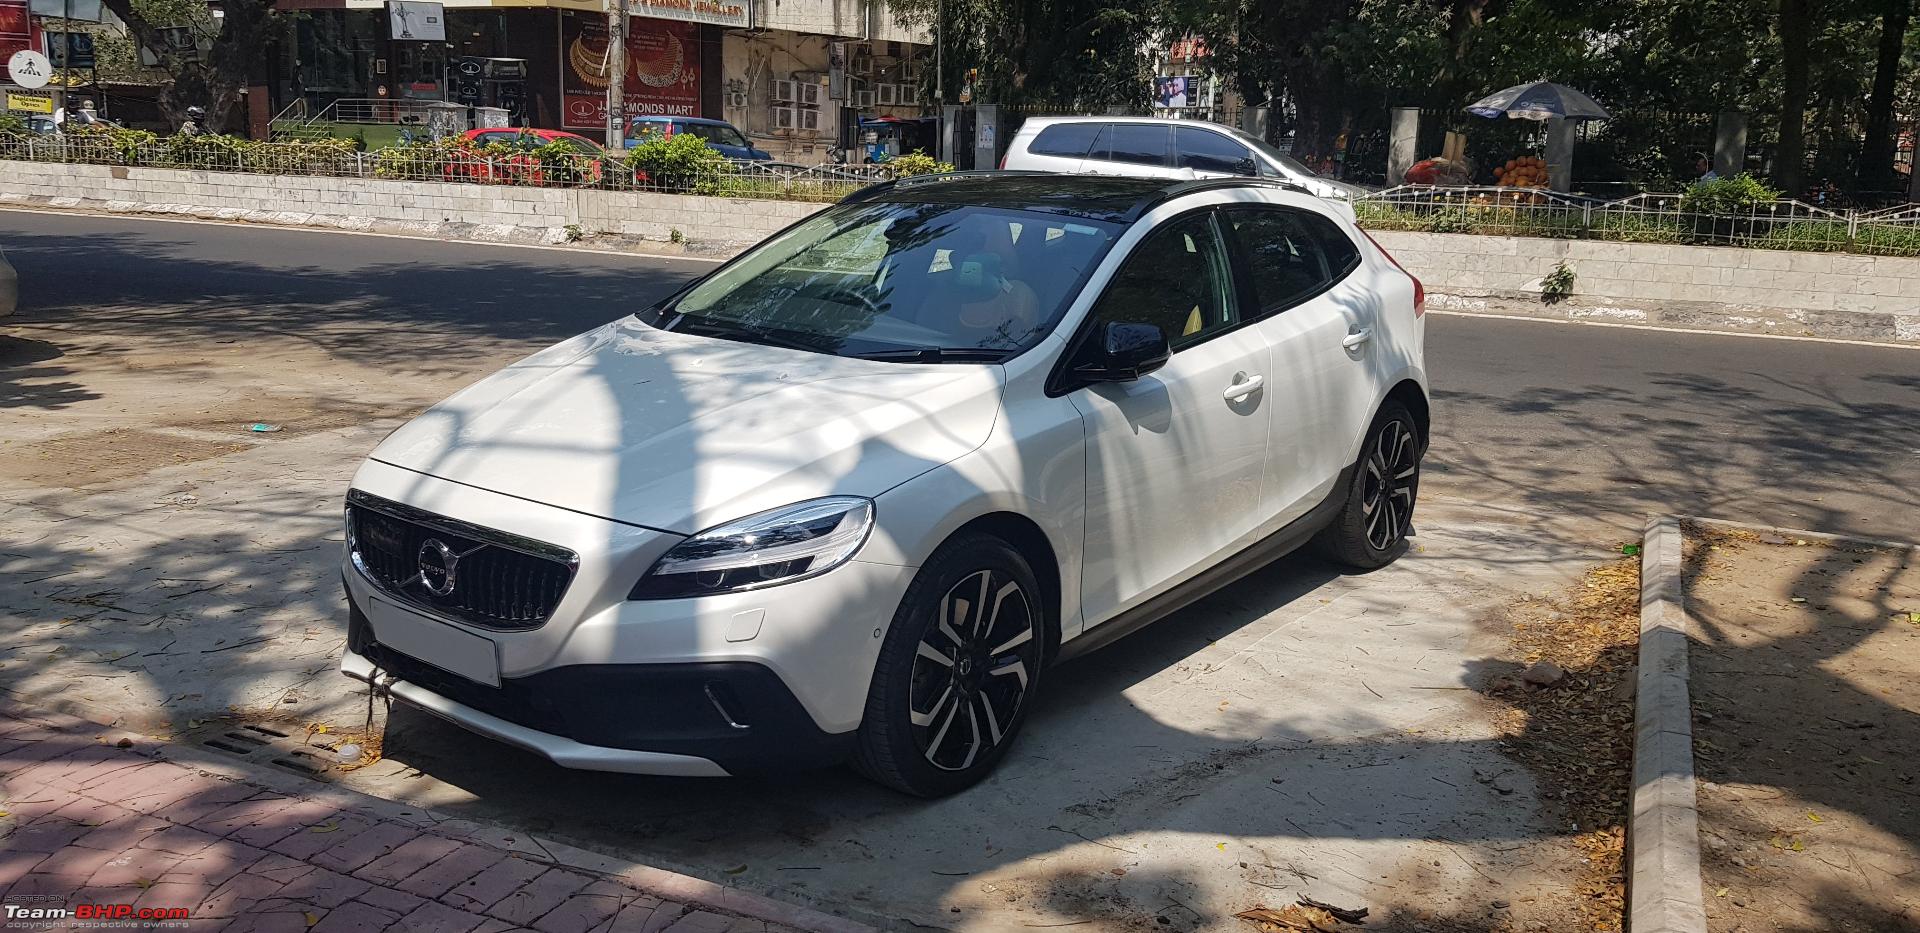 Volvo V40 Cross Country Car at best price in Mumbai by KIFS Volvo Cars